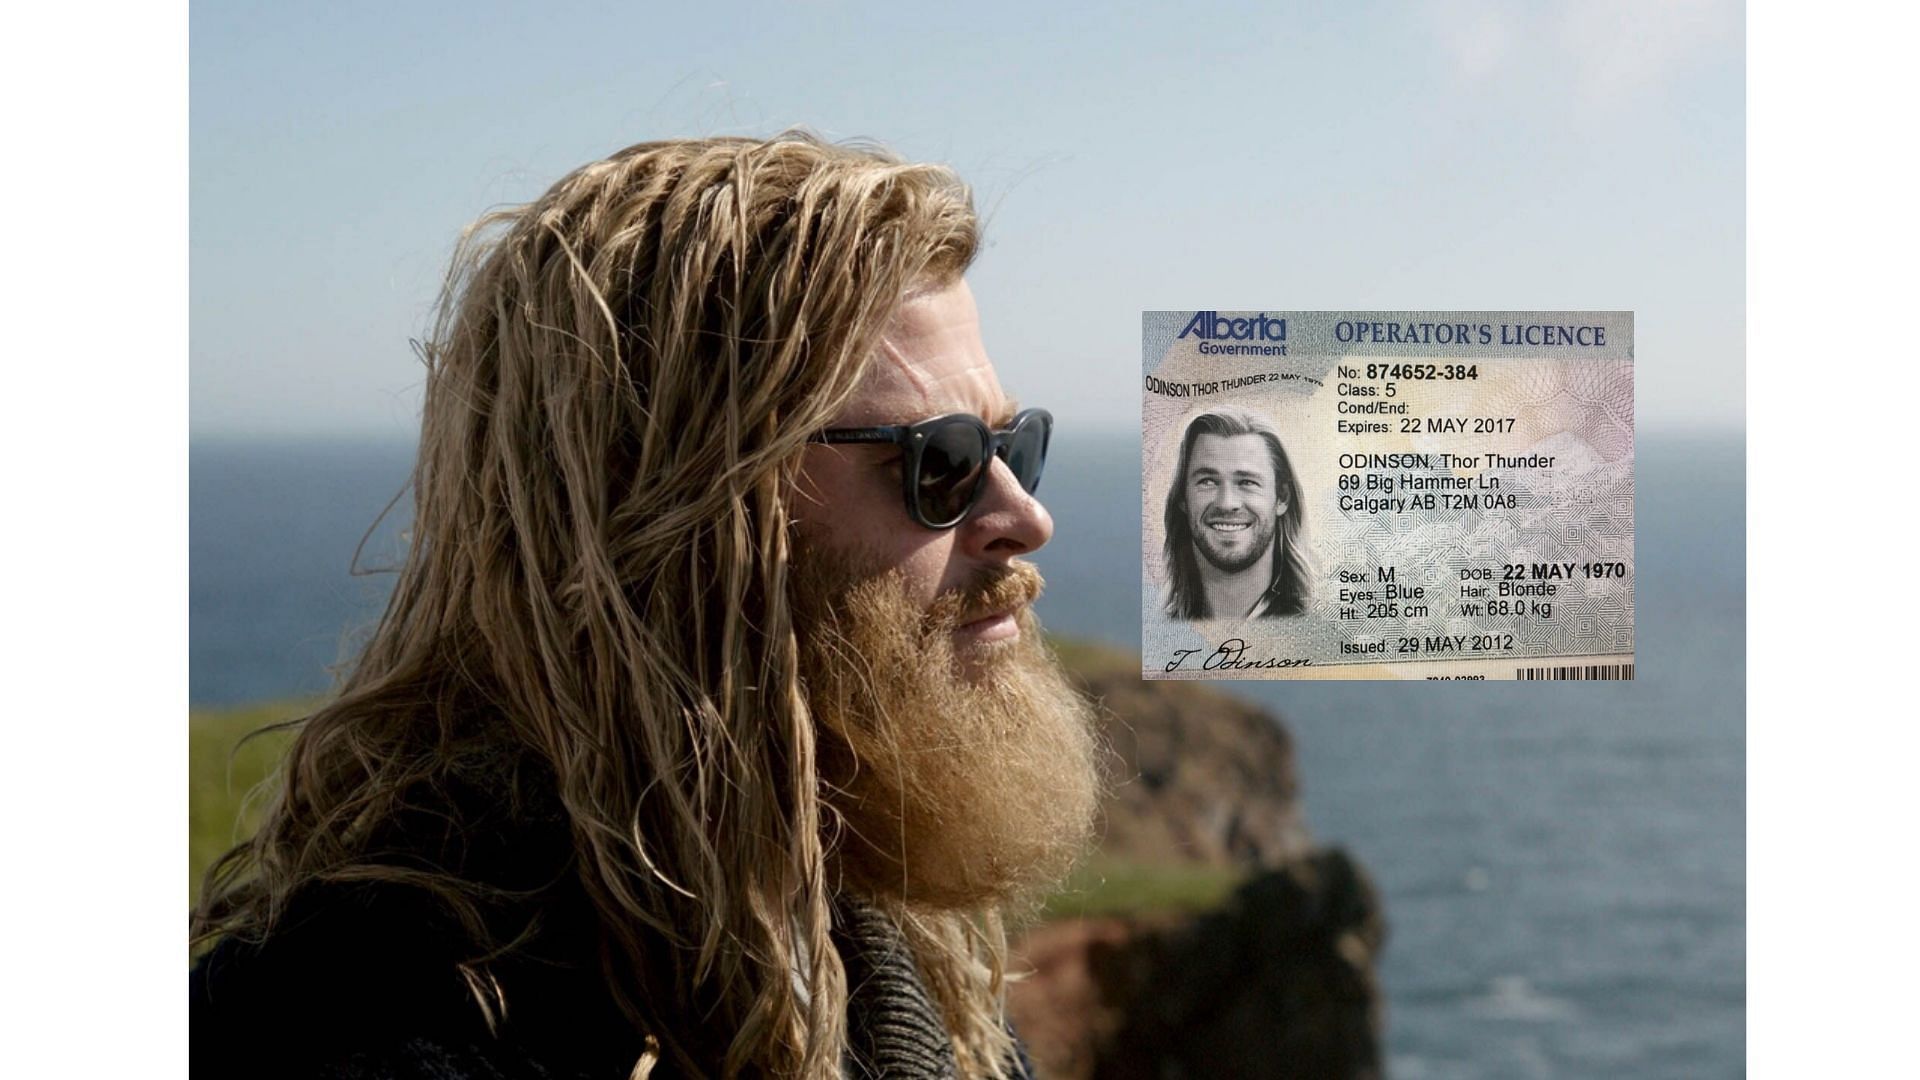 Man uses fake id of Thor in an attempt to buy marijuana.